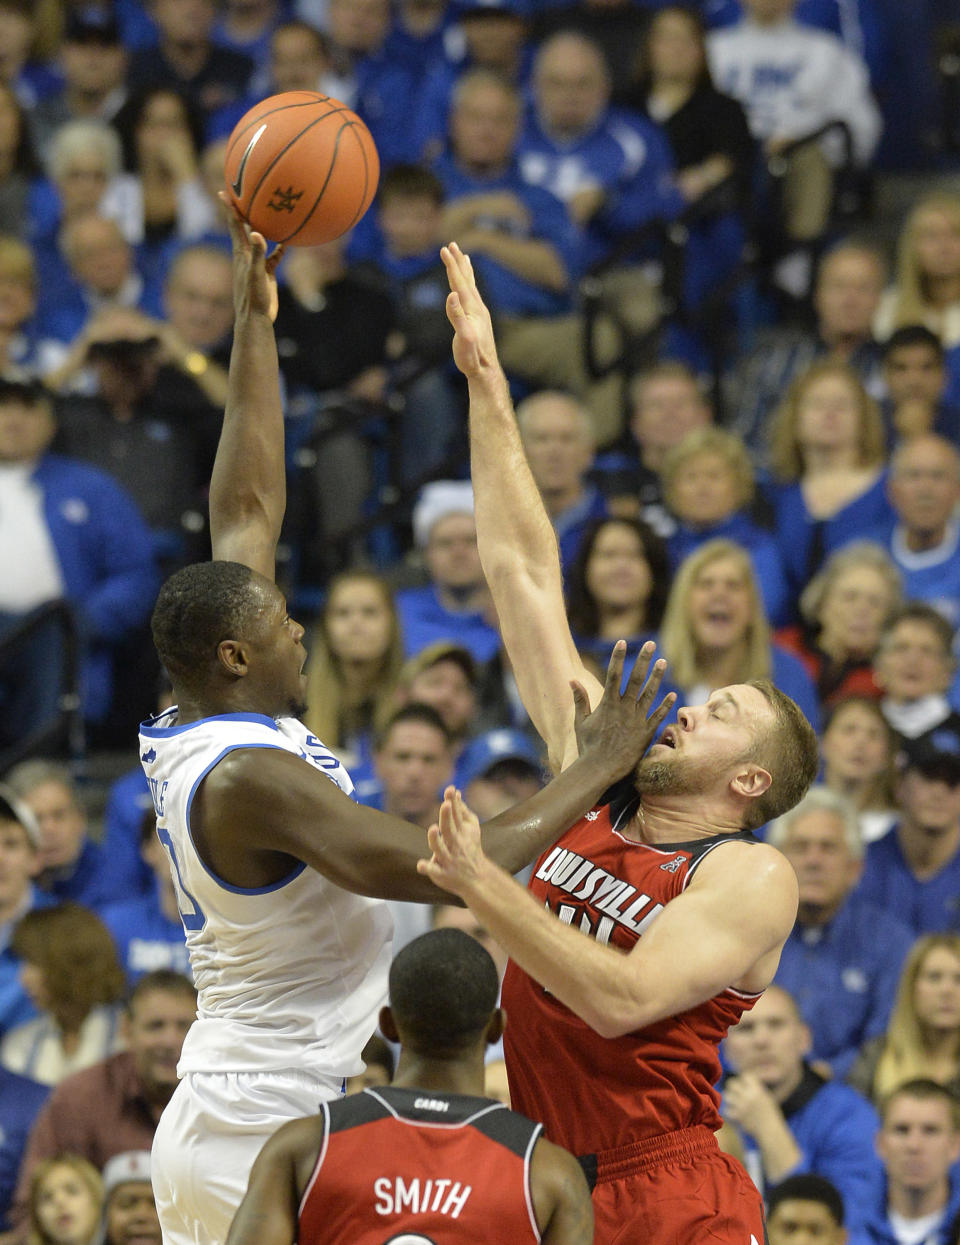 Kentucky's Julius Randle, left, shoots over the defense of Louisville Stephan Van Treese during the first half of an NCAA college basketball game on Saturday, Dec. 28, 2013, in Louisville, Ky. (AP Photo/Timothy D. Easley)